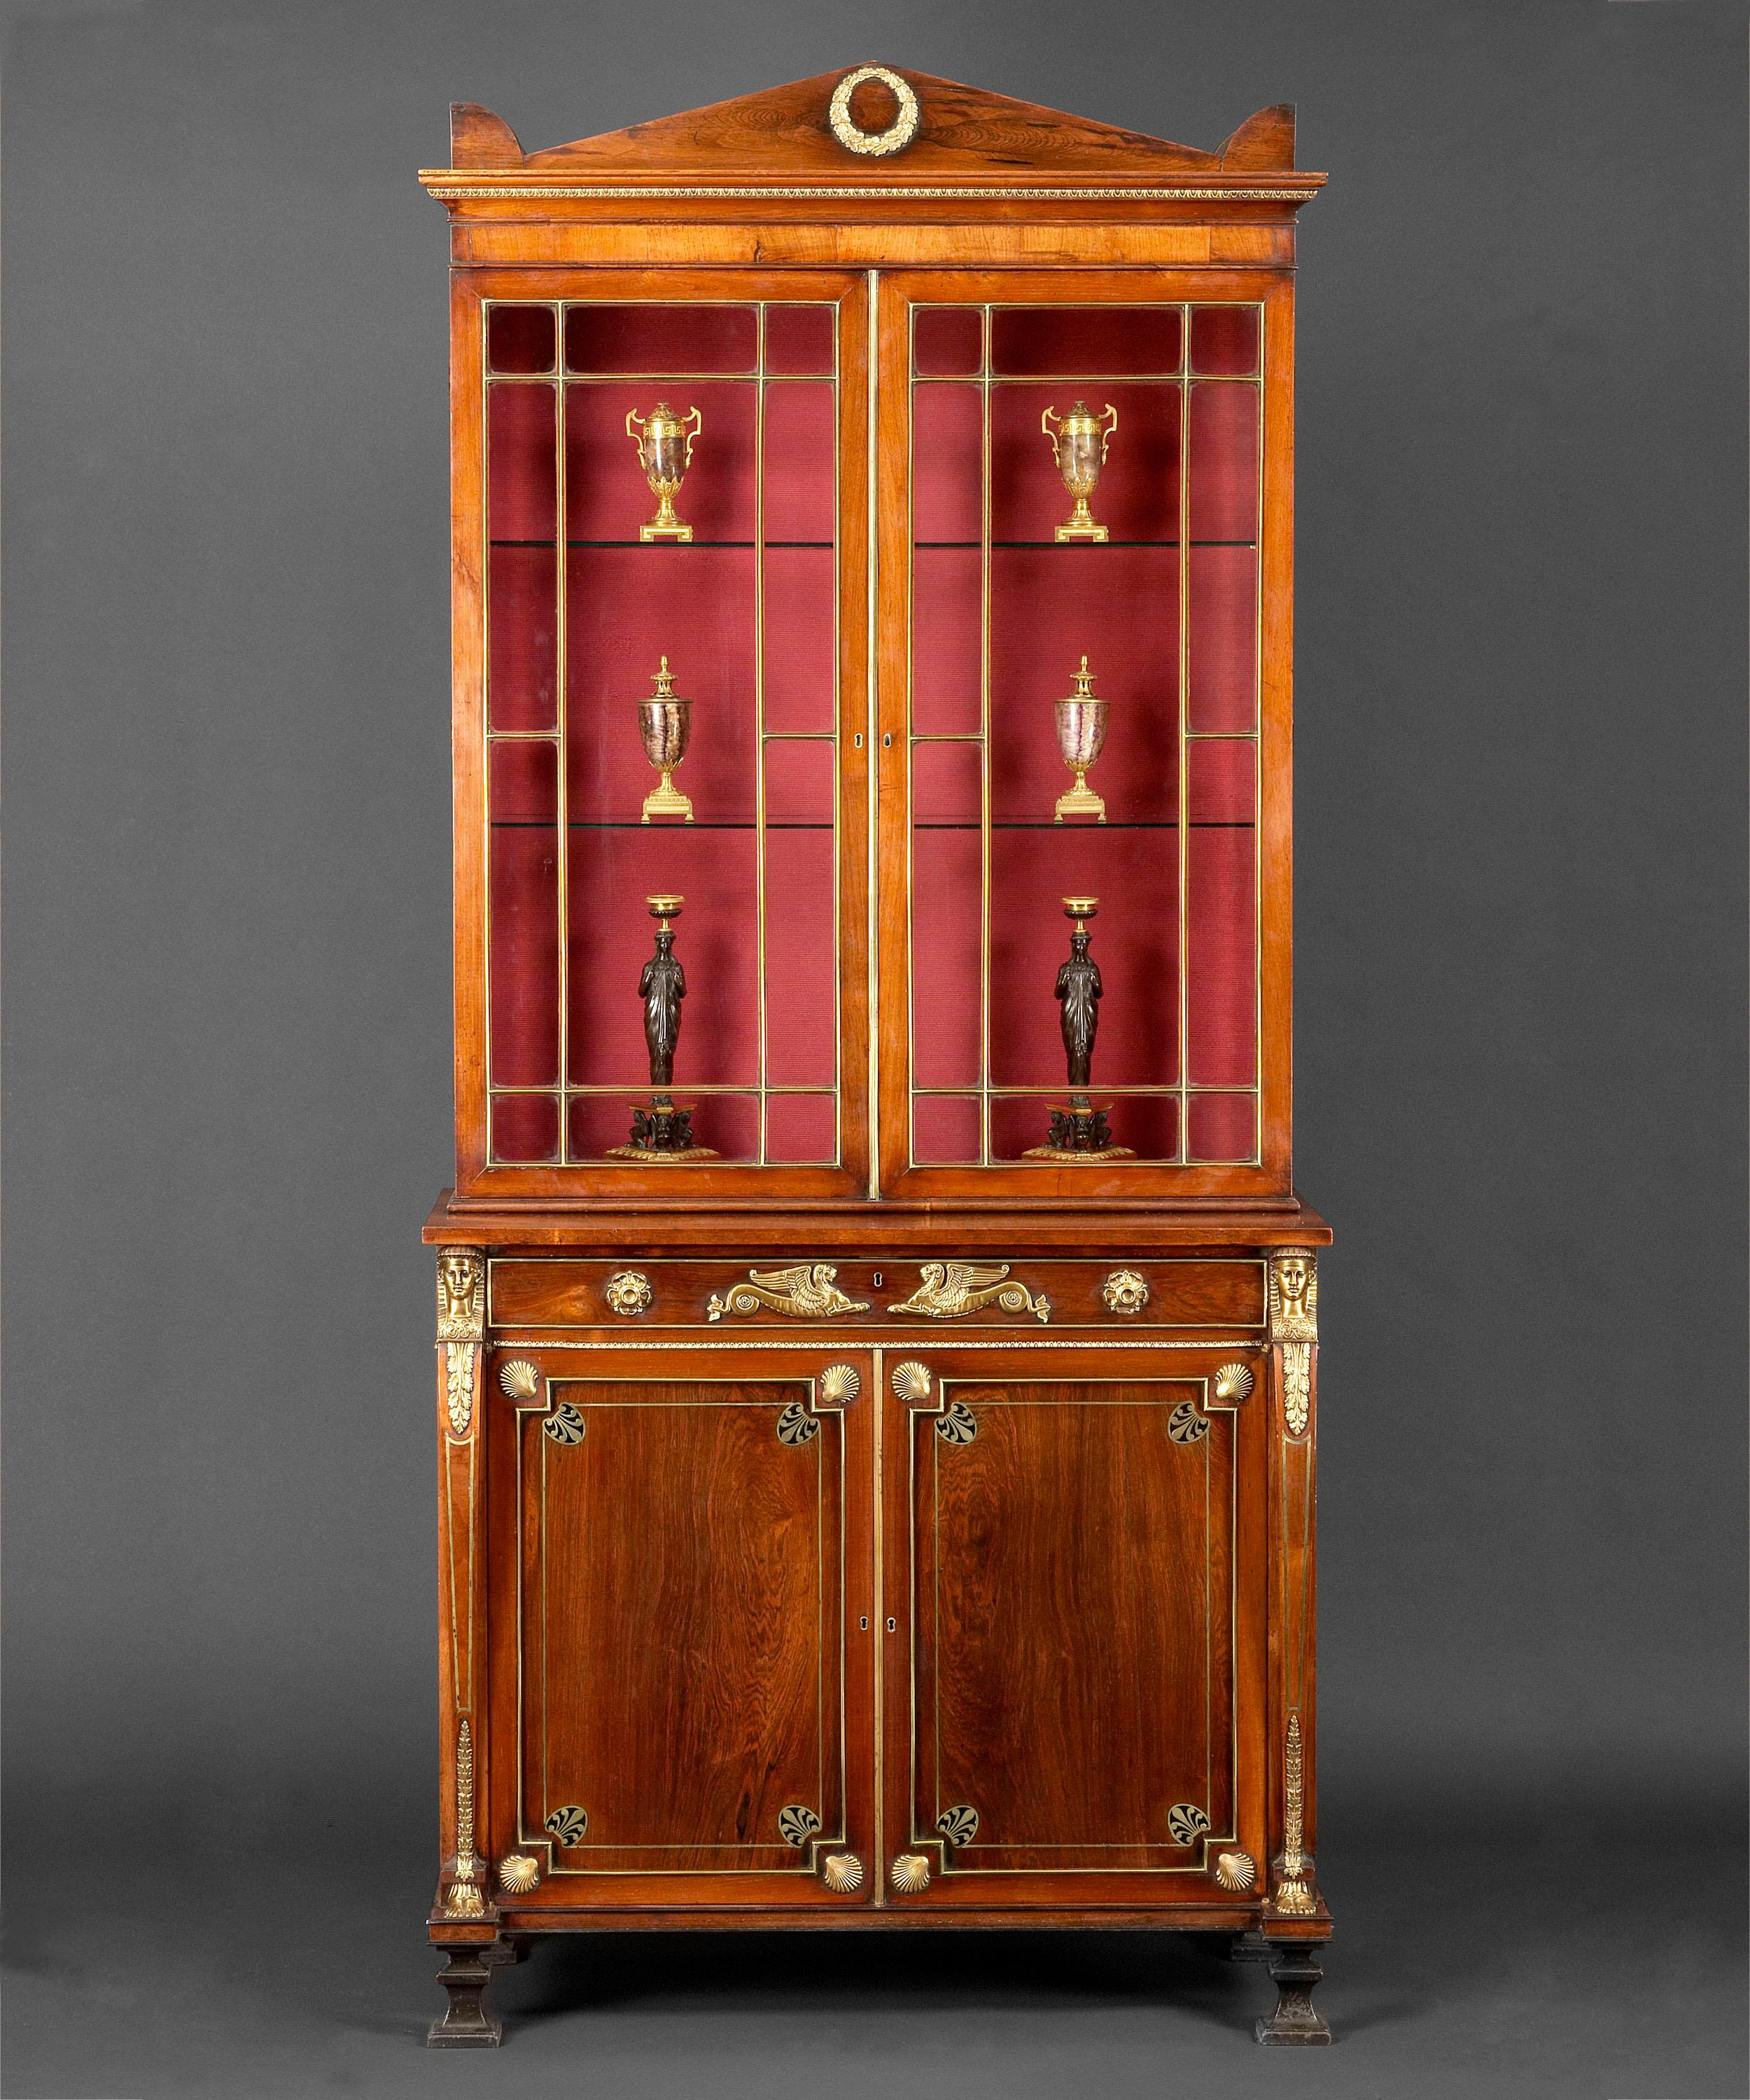 English Early 19th Century Regency Period Rosewood and Ormolu Mounted Secretaire Cabinet For Sale